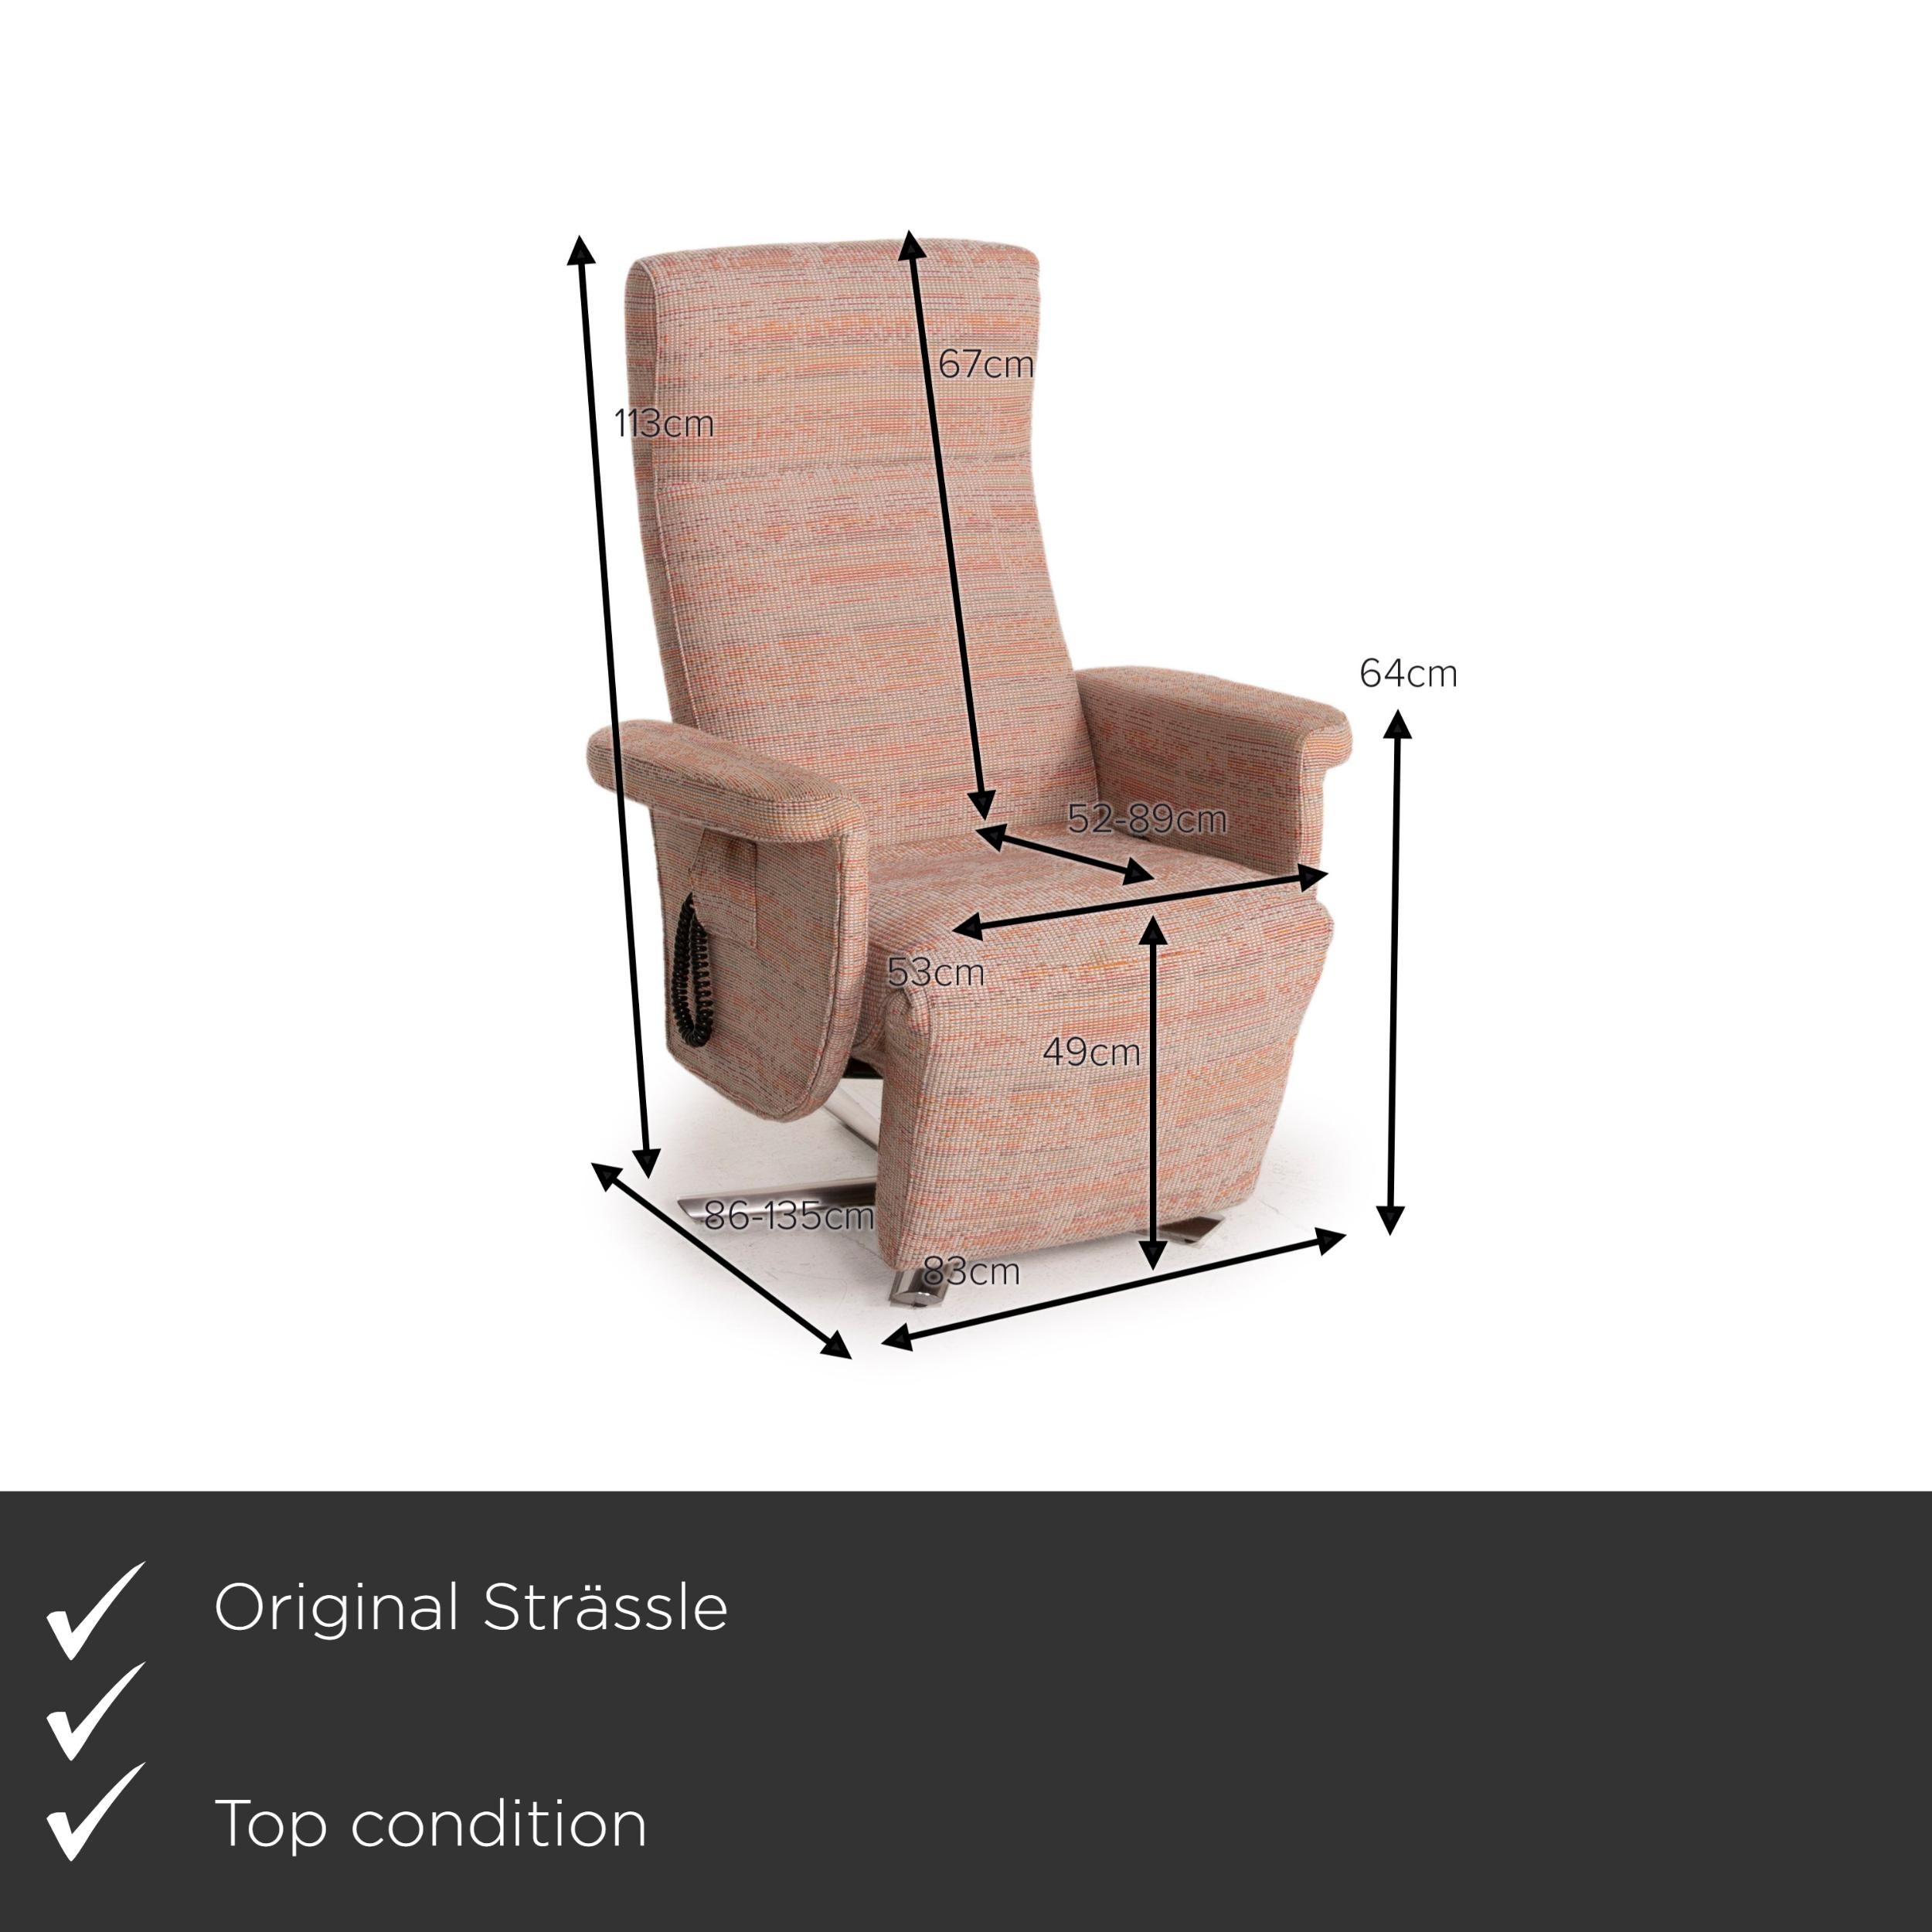 We present to you a Strässle fabric armchair rosé beige pastel electrical function relaxation.


 Product measurements in centimeters:
 

Depth: 86
Width: 83
Height: 113
Seat height: 49
Rest height: 64
Seat depth: 52
Seat width: 53
Back